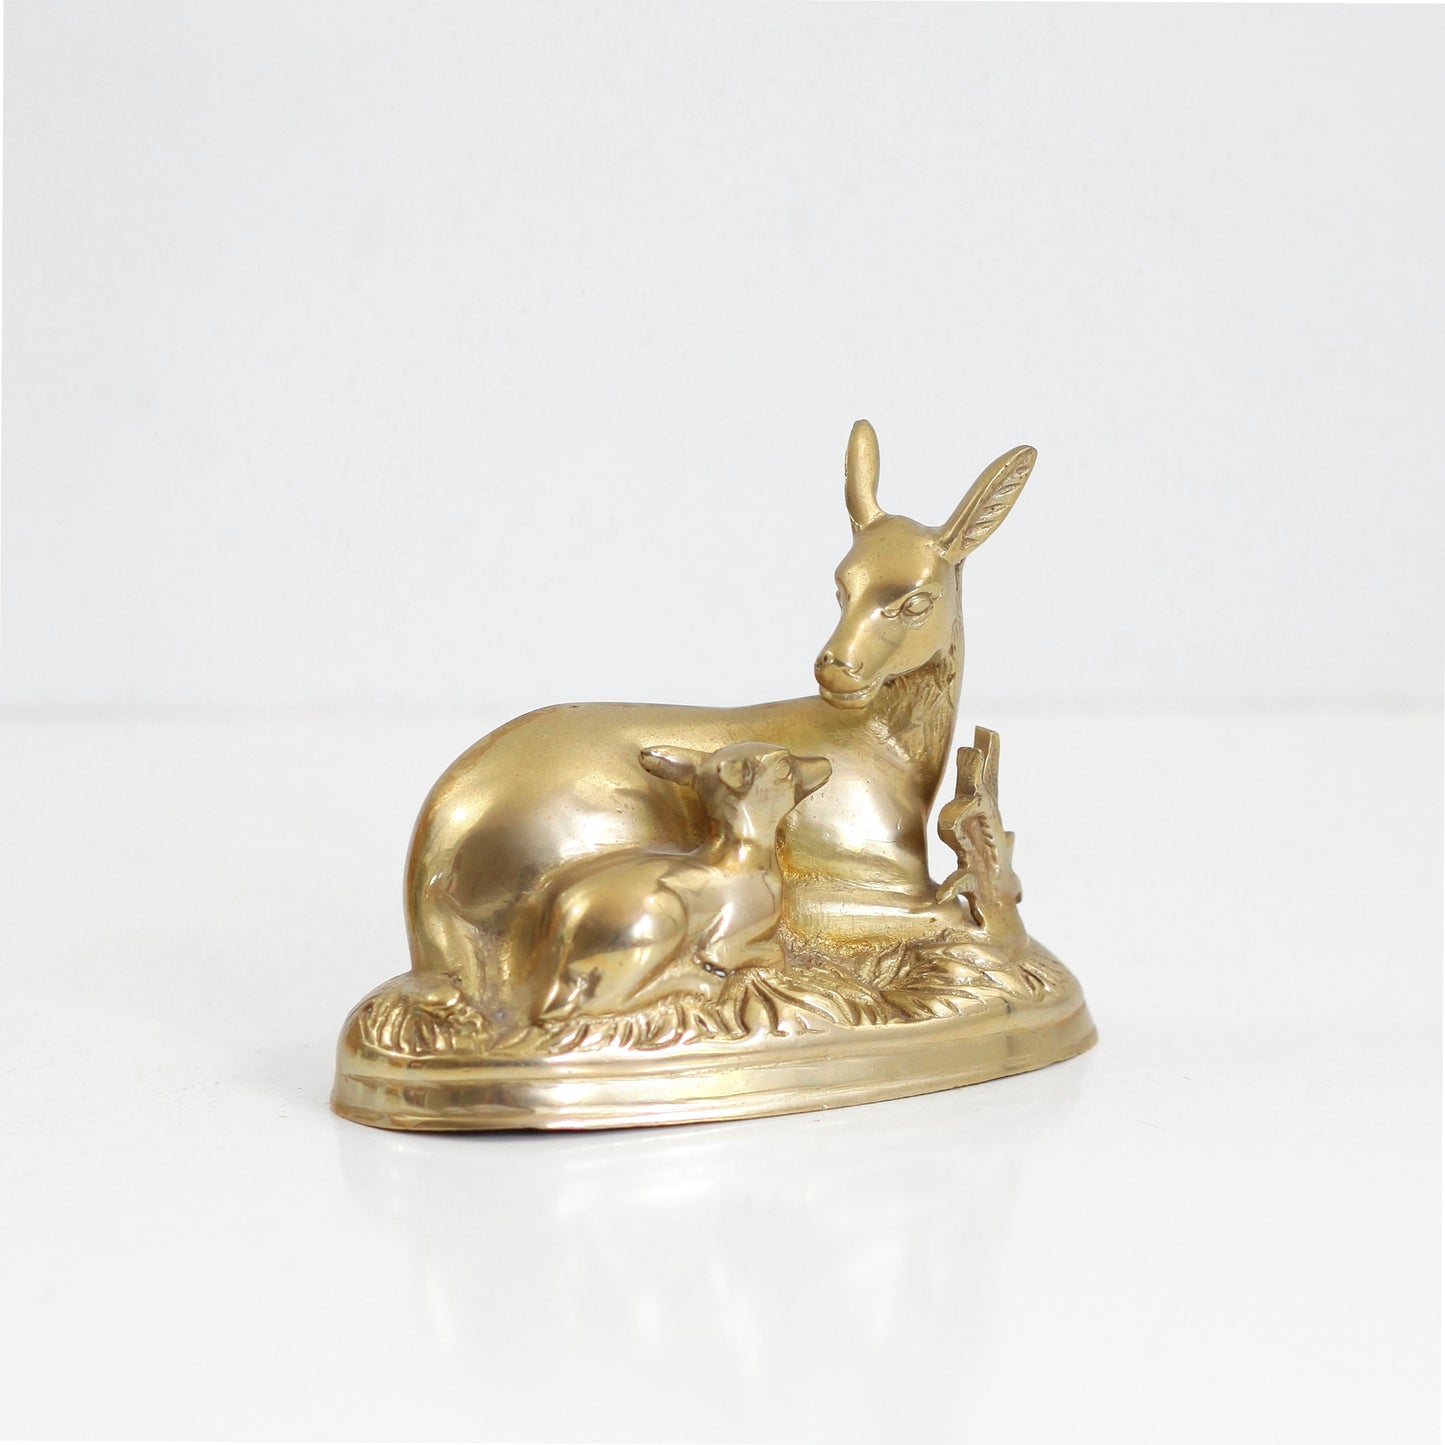 SOLD - Vintage Brass Deer Figurine - Doe and Baby Fawn